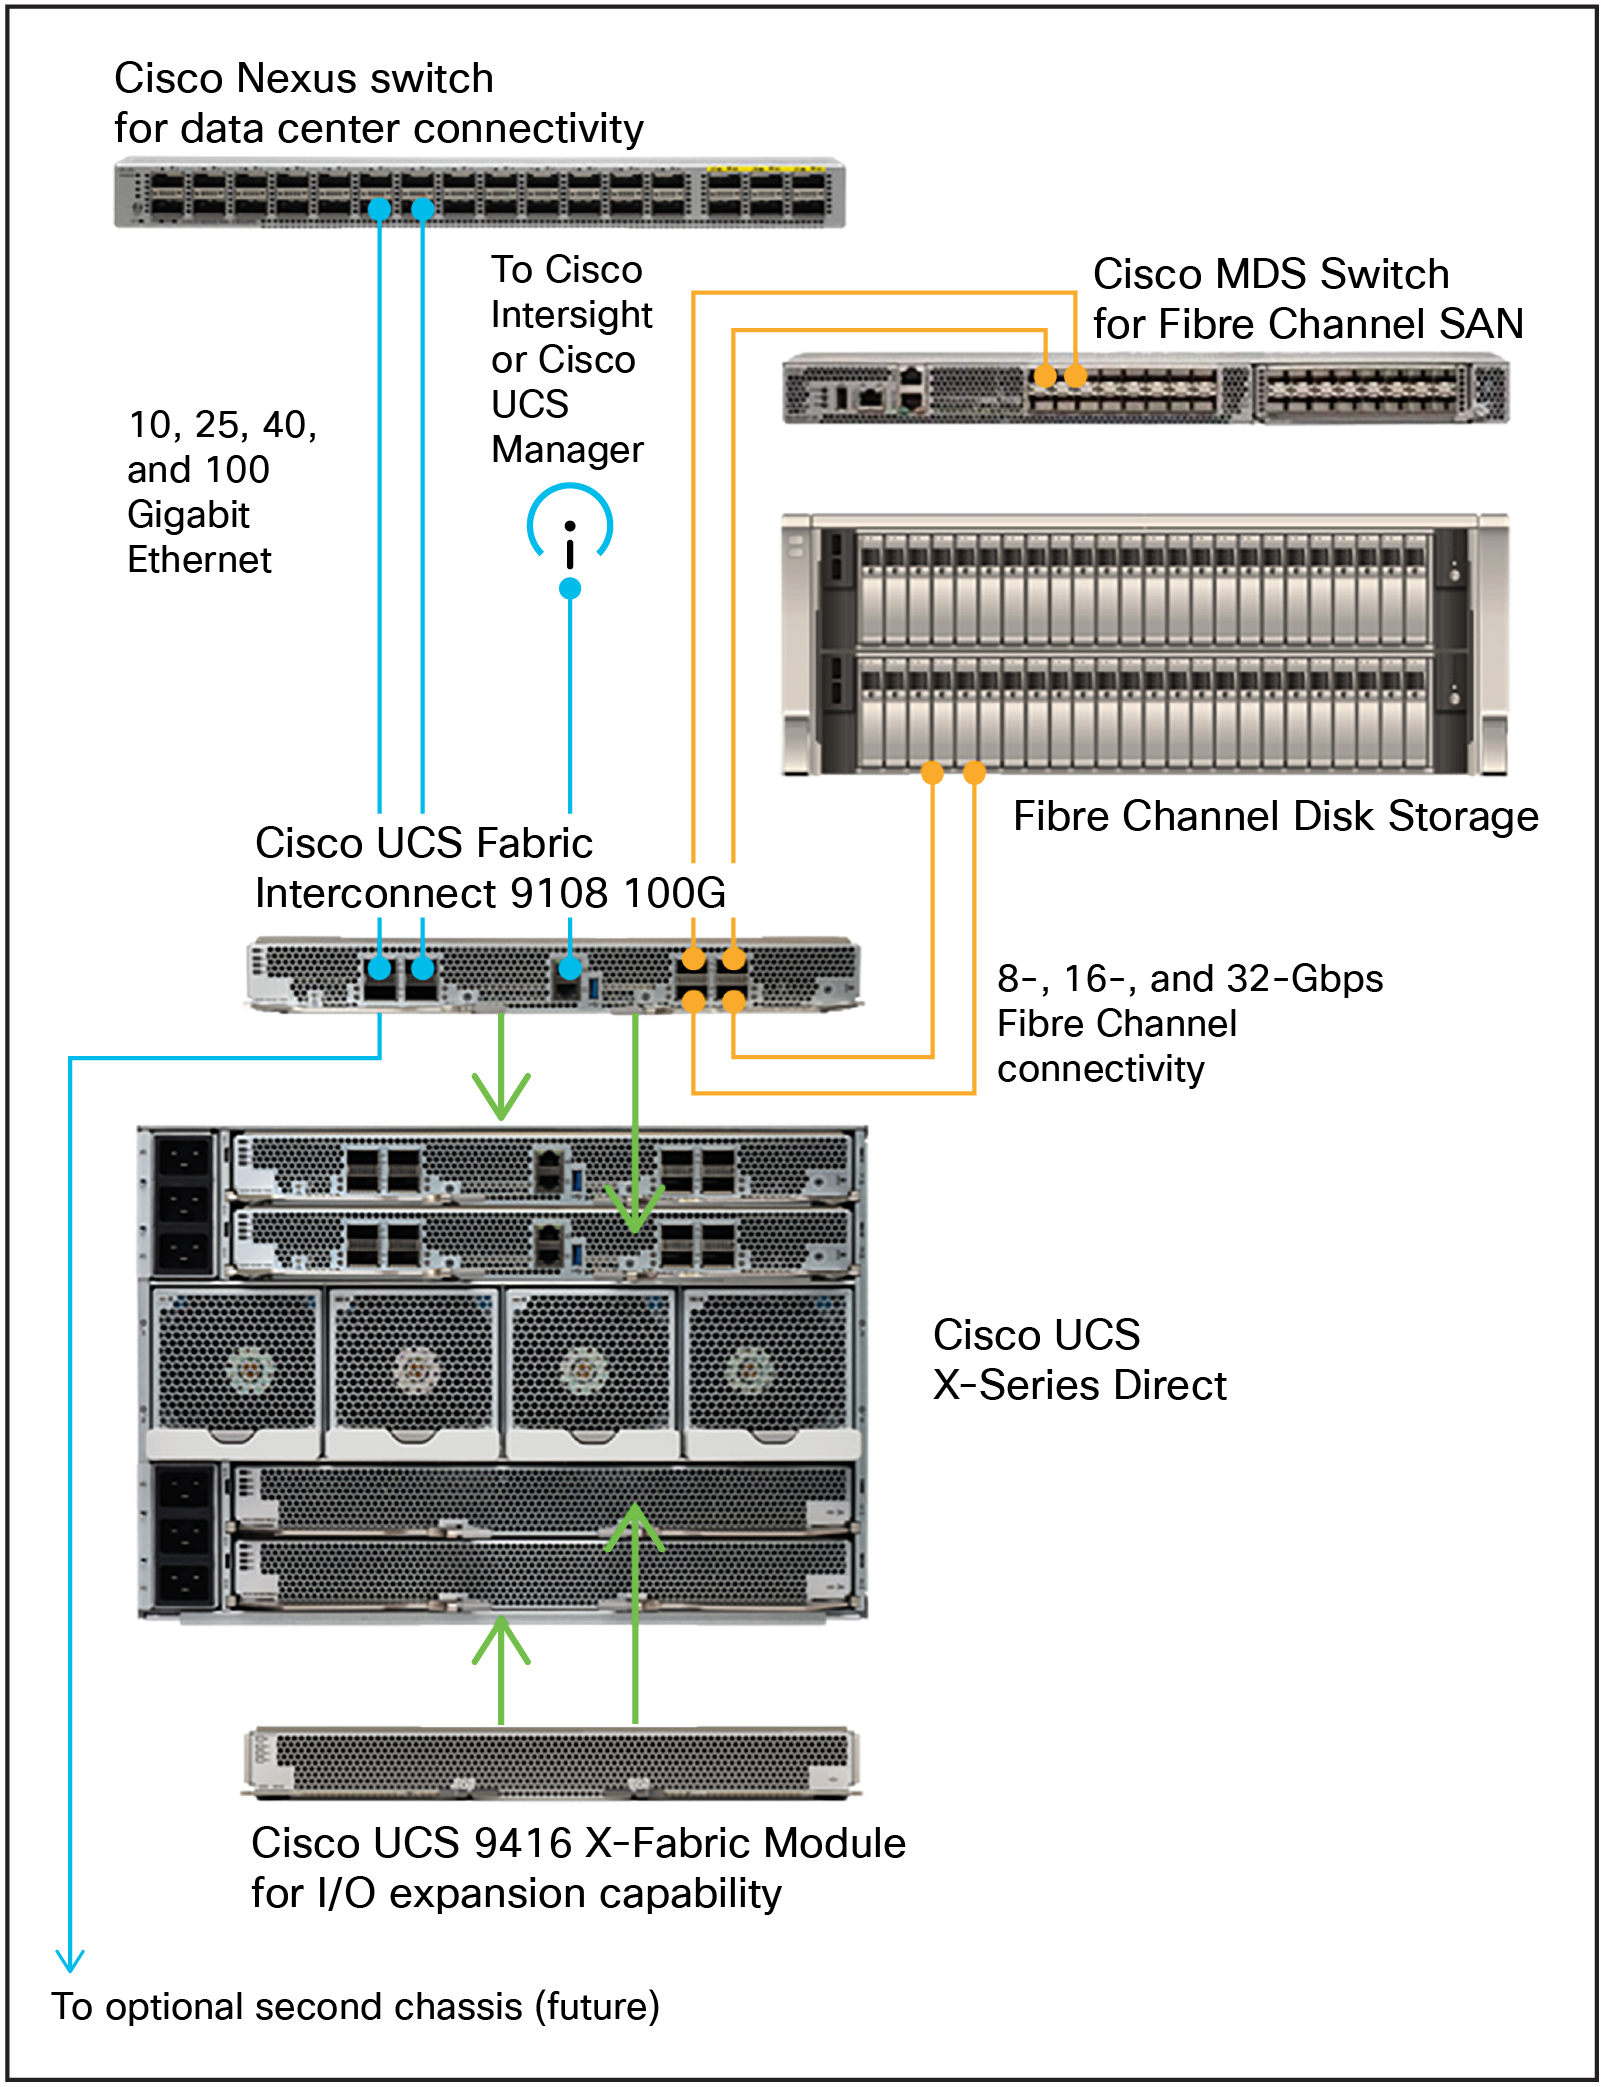 Cisco UCS X-Series Direct architectural options